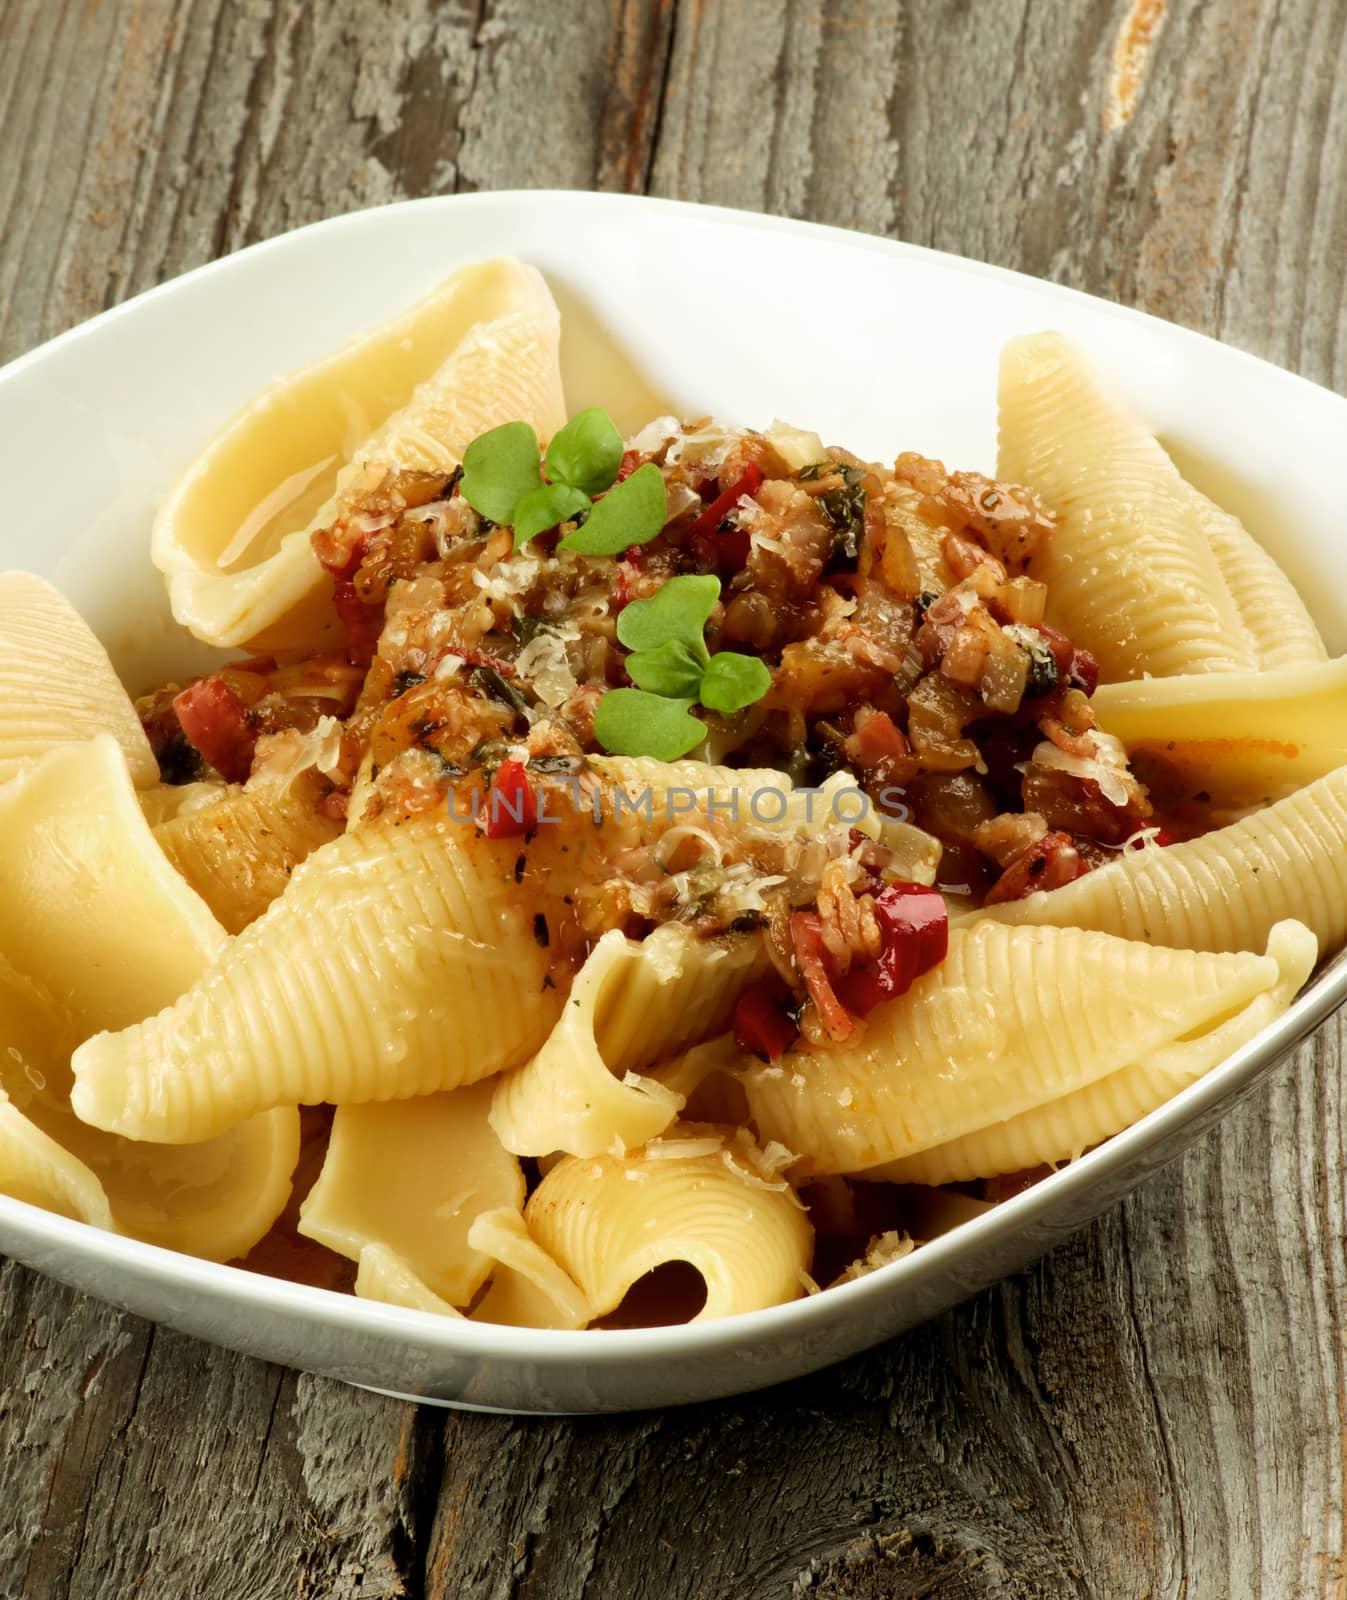 Delicious Conchiglie Giganti Pasta (Giant Pasta Shells) with Meat Sauce Bolognese in White Bowl Cross Section on Wooden background